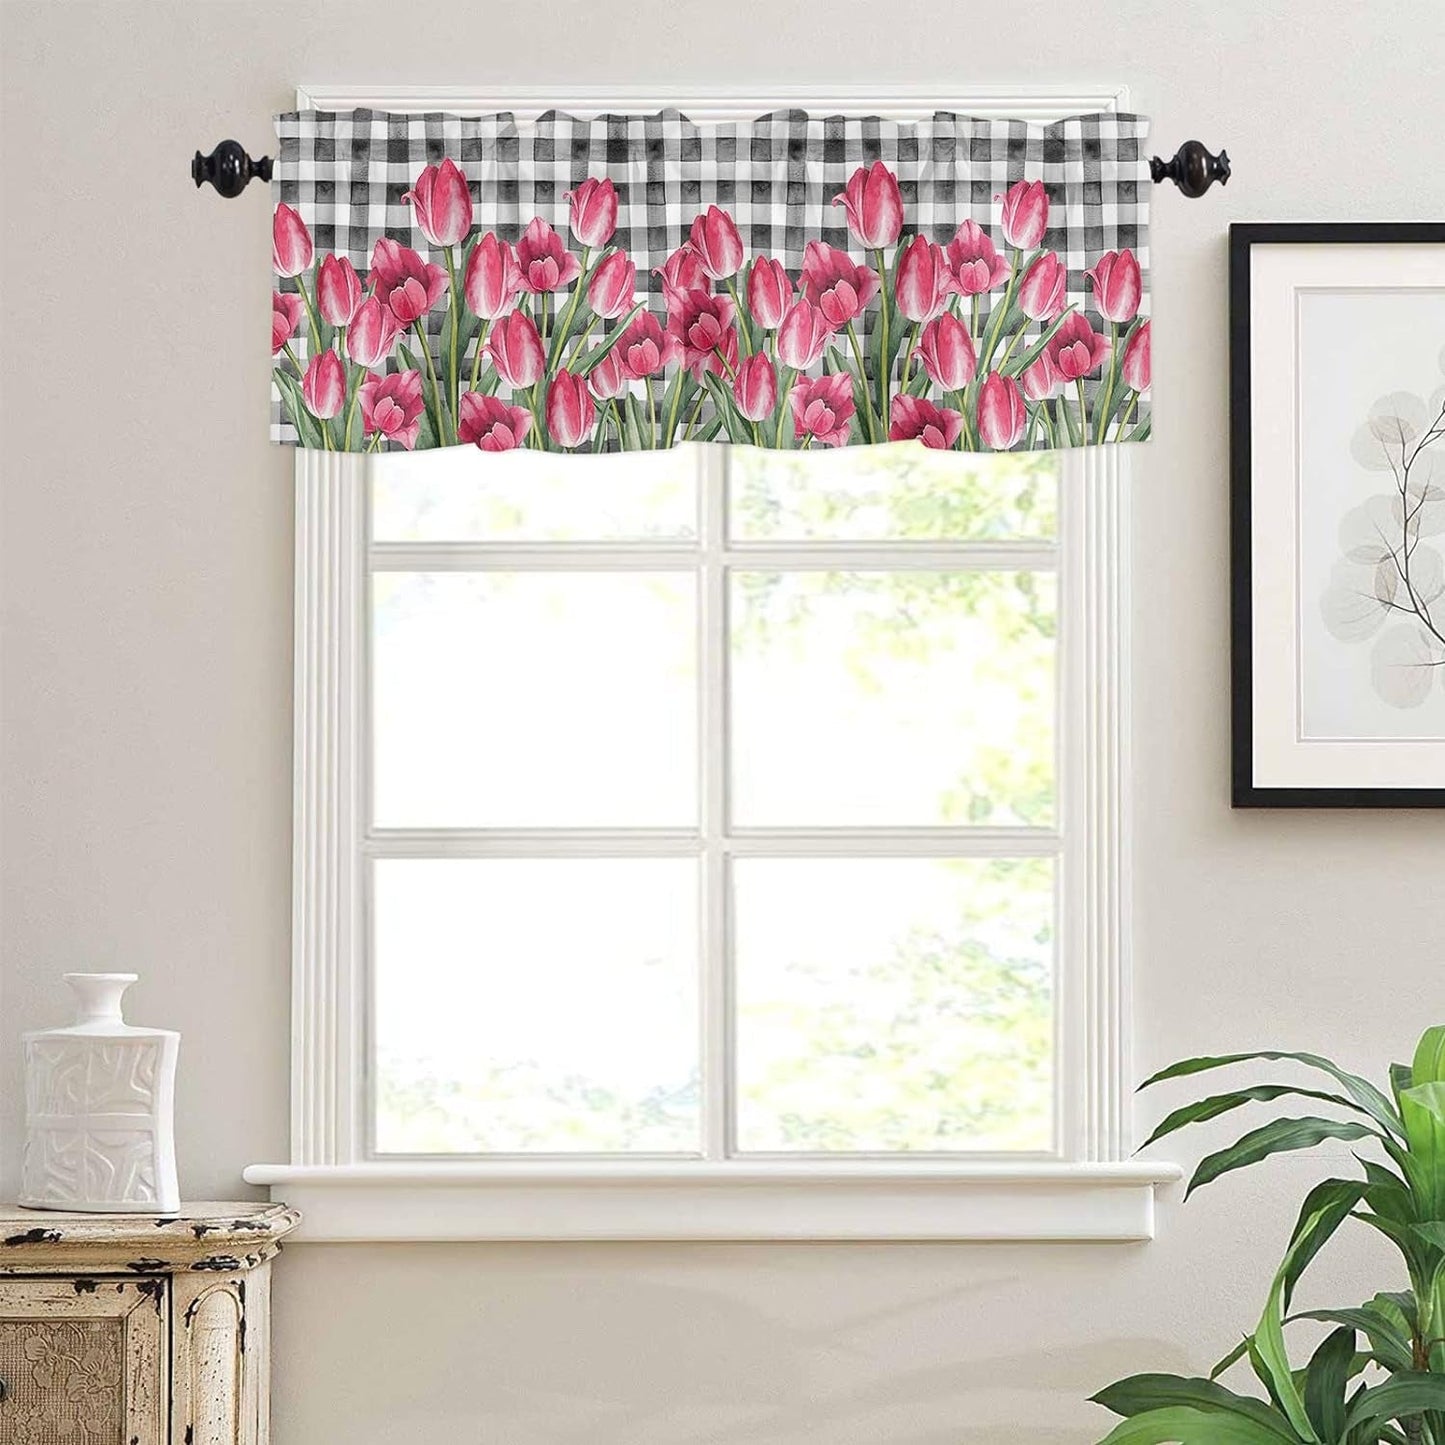 Curtain Valance for Window Watercolor Pink Tulip Black White Buffalo Plaid Rod Pocket Valance Drapes Window Treatment for Kitchen Living Room Bedroom Holiday Decoration 54X18Inch